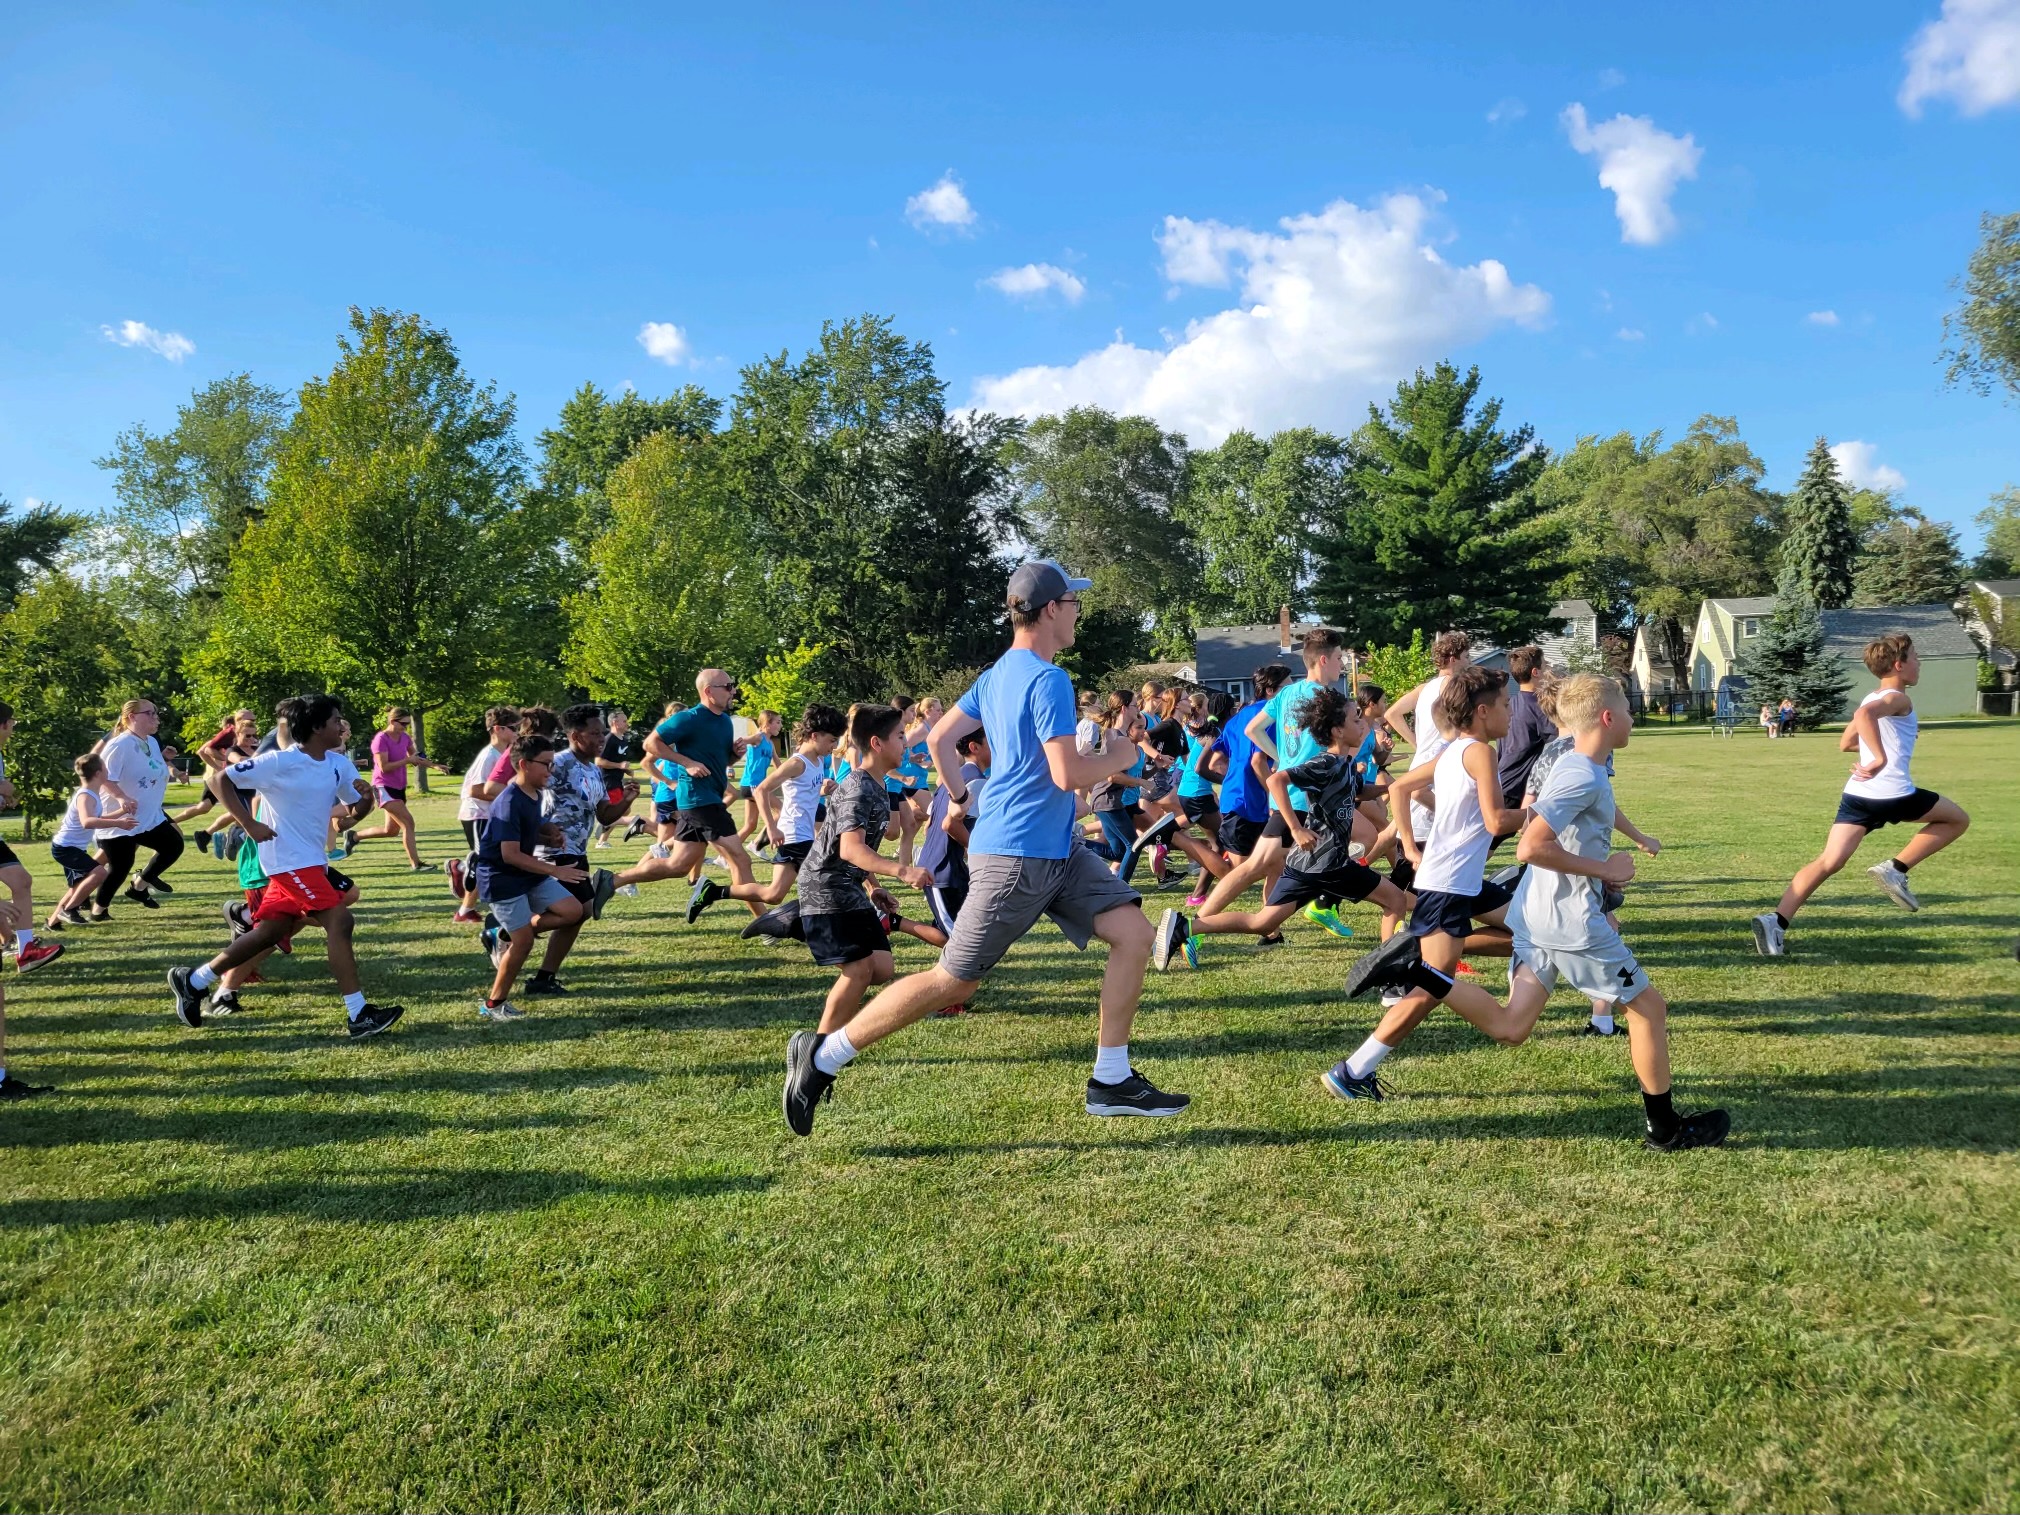 Kahler’s cross country teams hosted their “3rd Annual Students vs. Adults Meet” on Wednesday, August 31st.